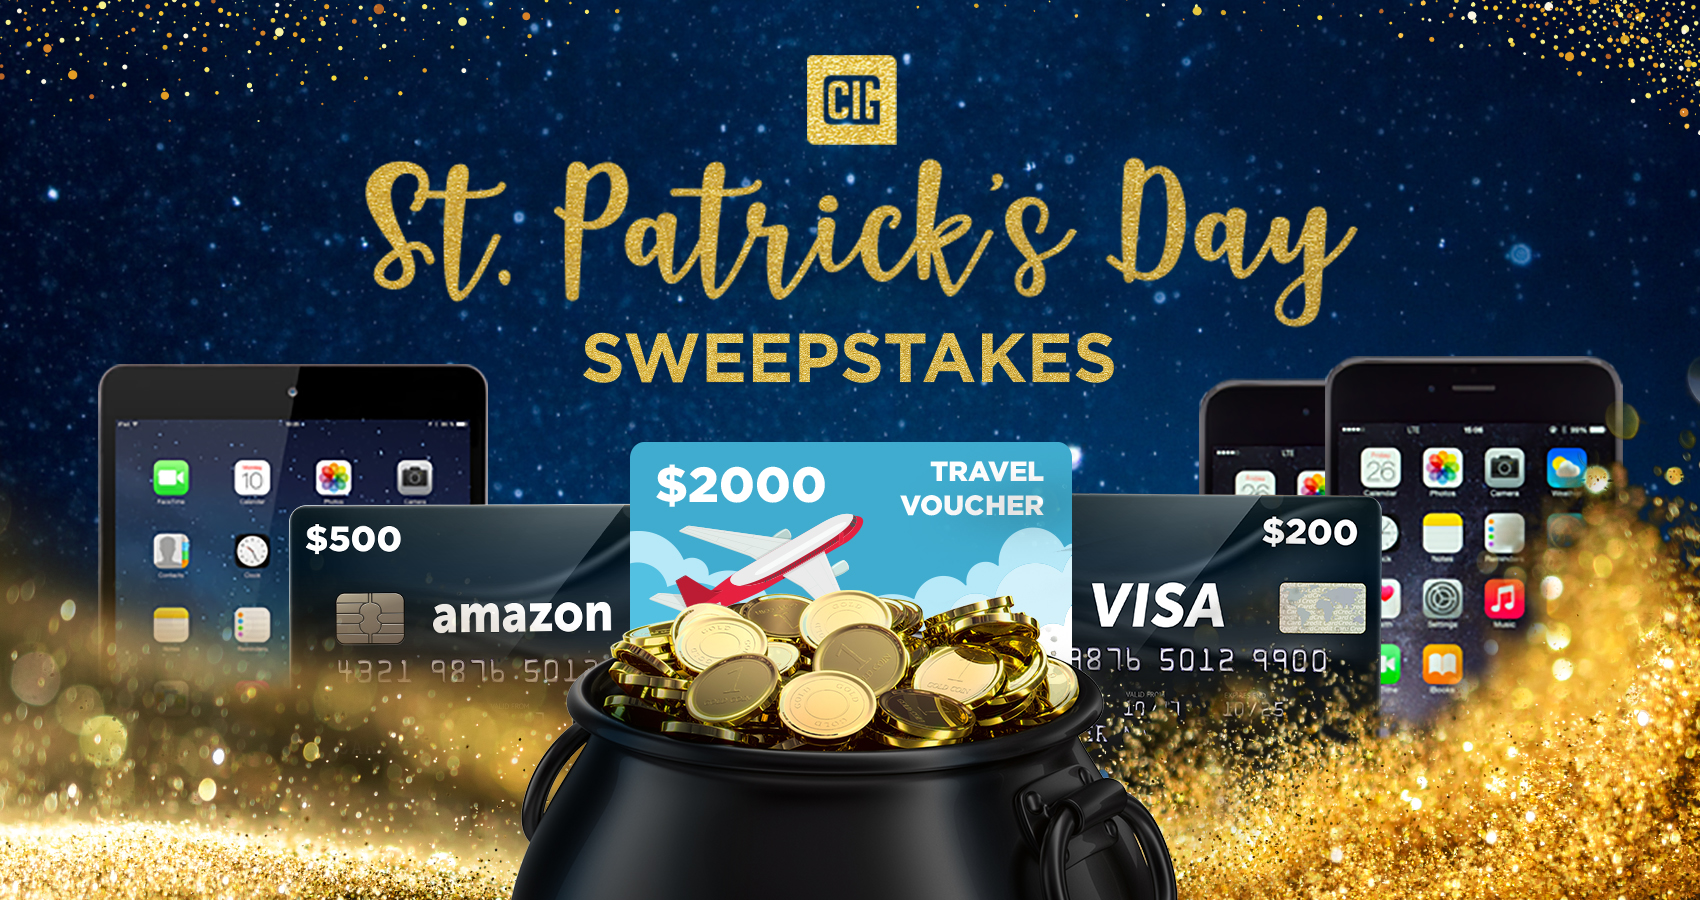 Clover Launches St. Patrick’s Day Sweepstakes